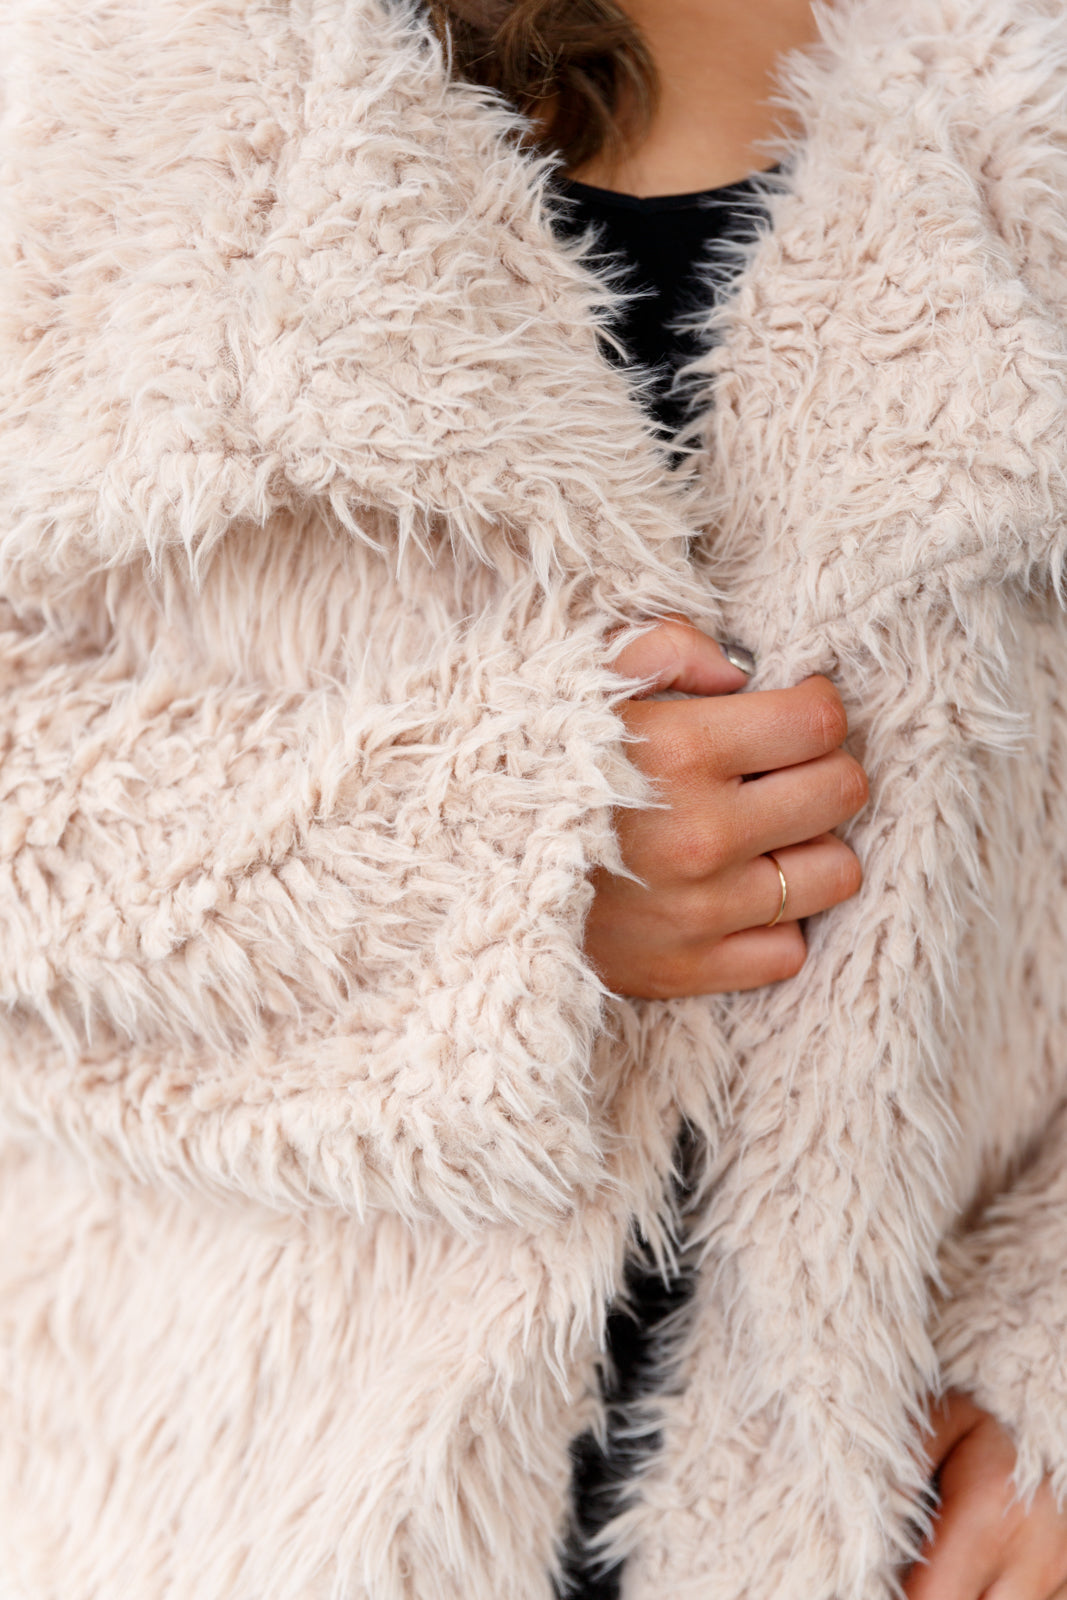 This Disco Queen Faux Fur Coat will make you shine on the dance floor! Its shaggy faux lambs fur, pockets, open front, and exaggerated fold over collar are sure to turn heads. This coat will keep you warm and stylish all night long! S - 3X